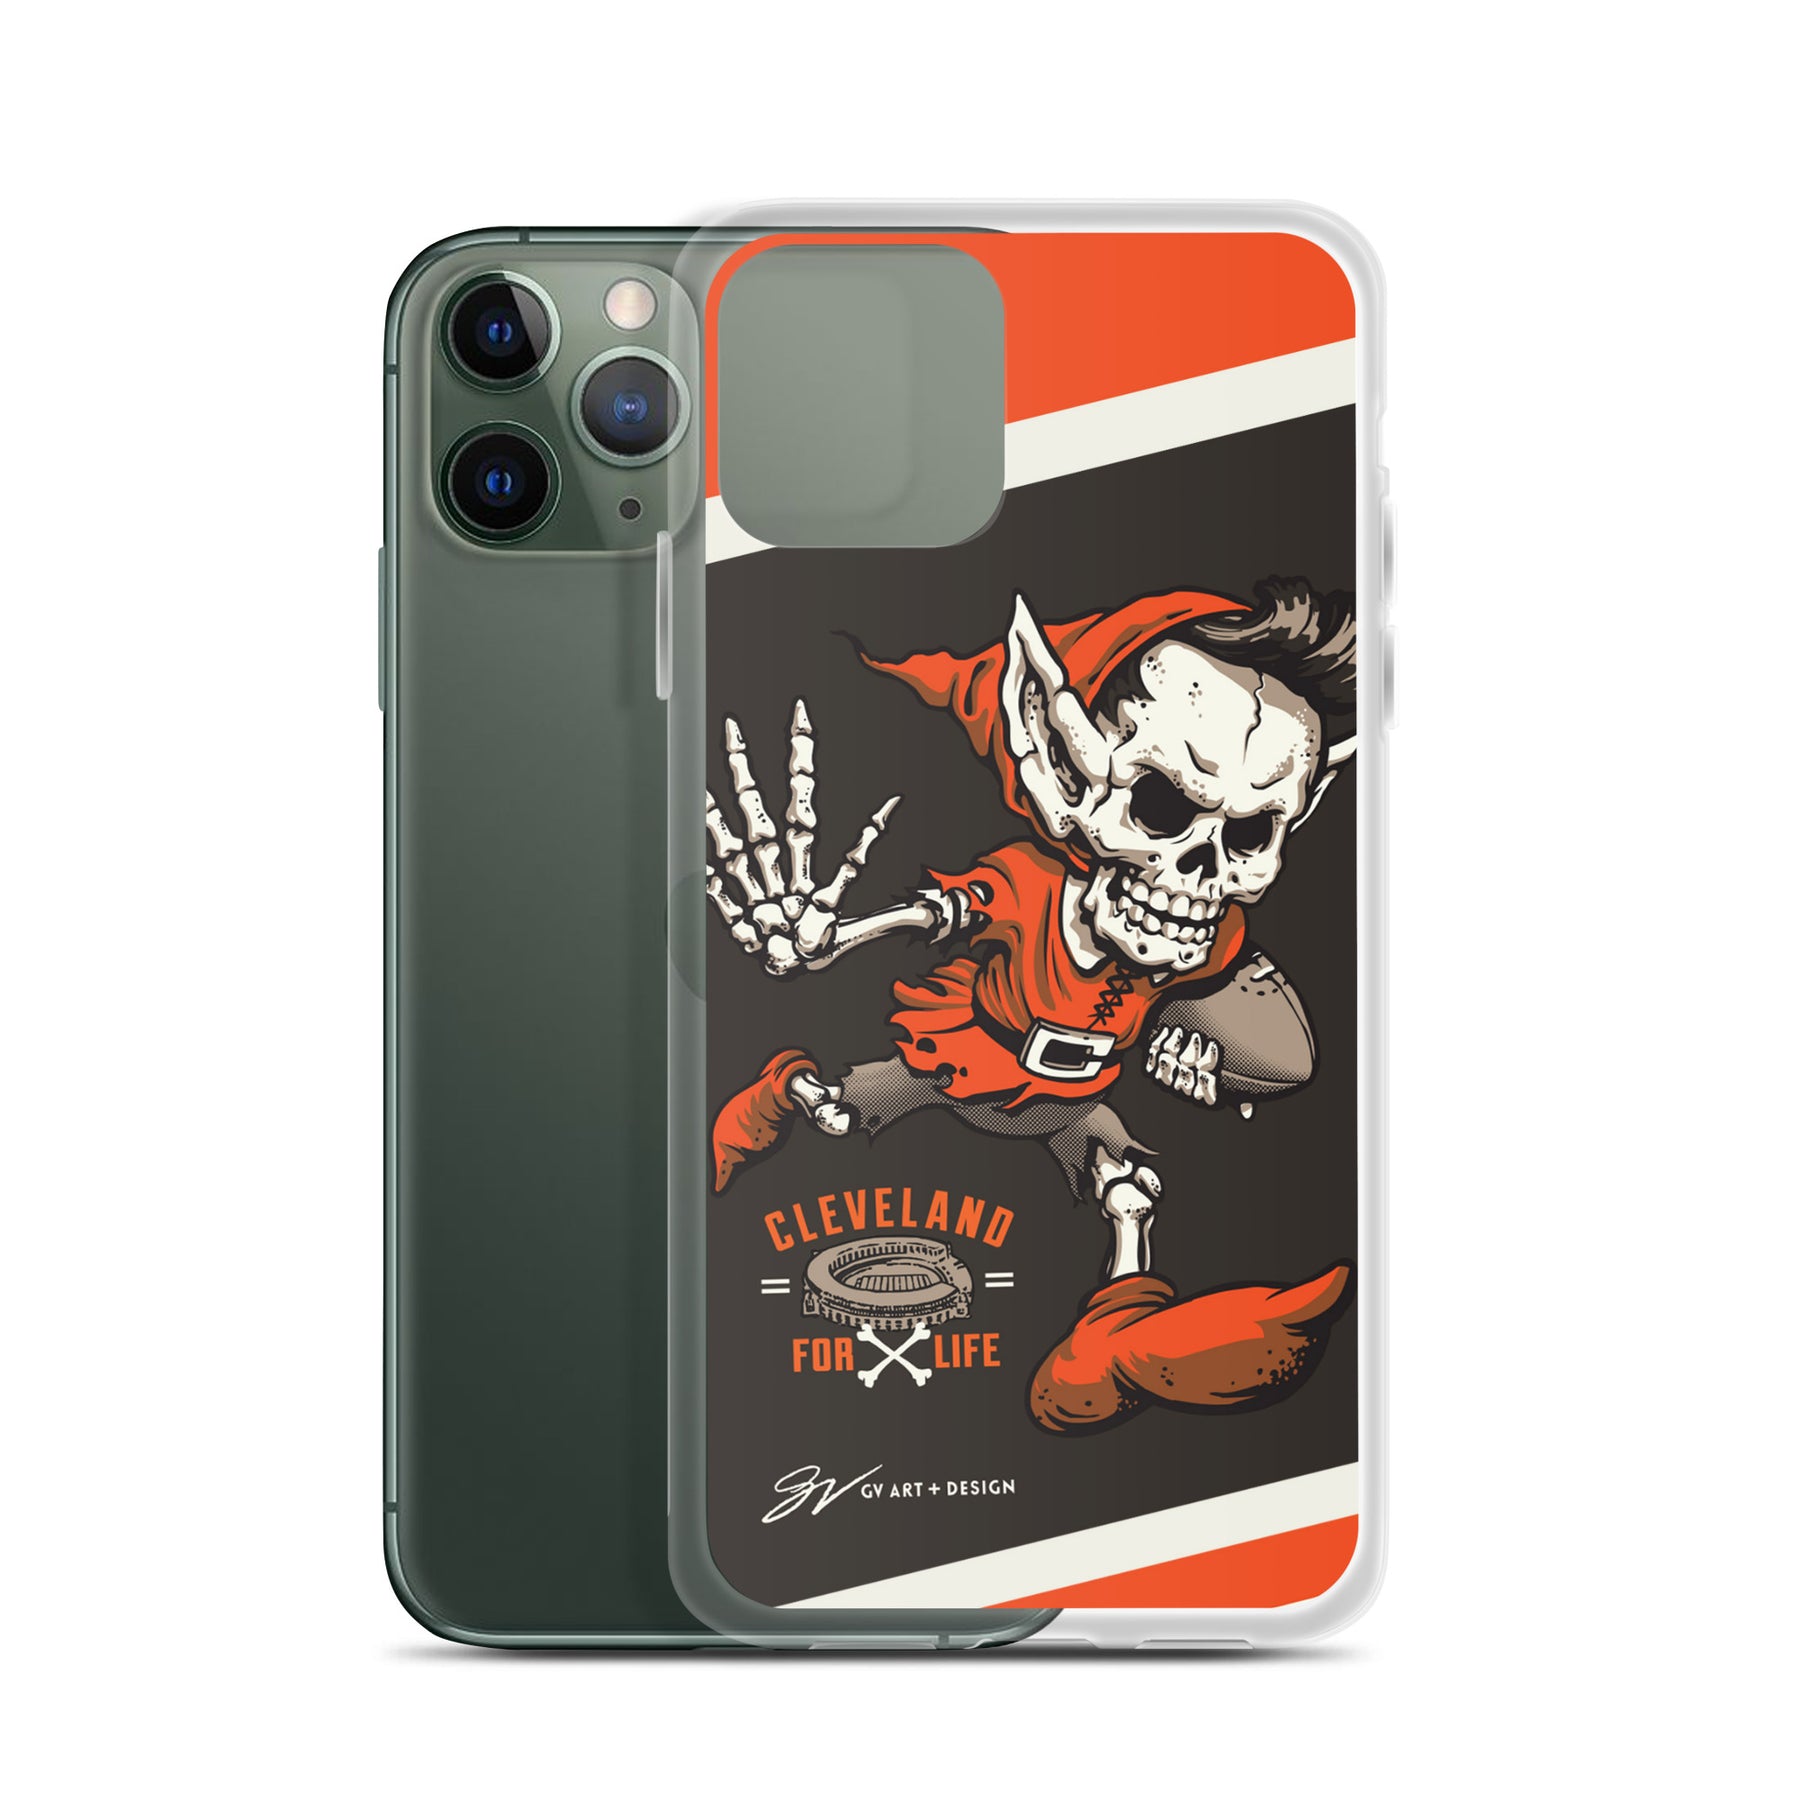 Cleveland Football For Life iPhone Case